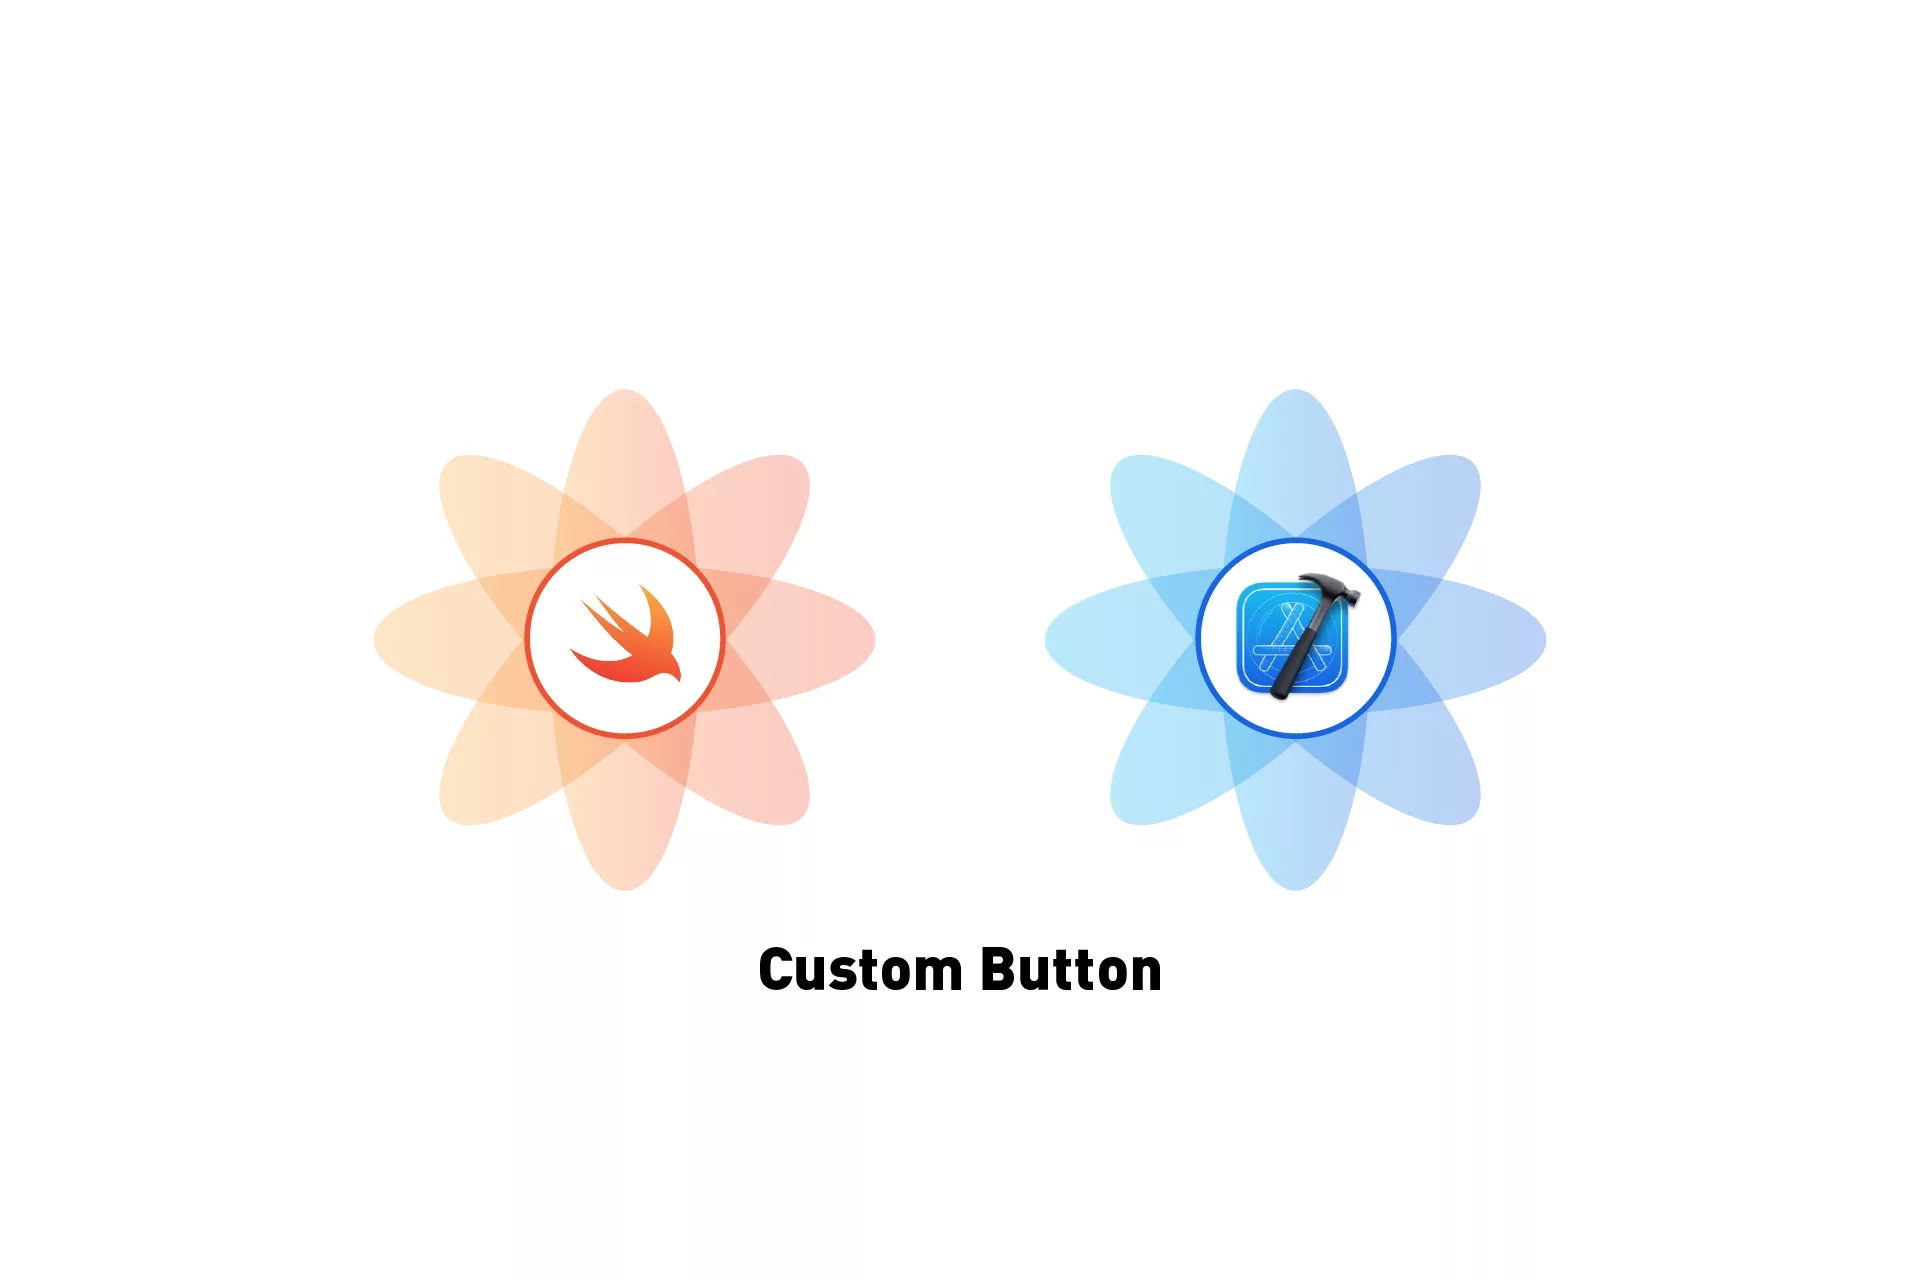 A flower that represents Swift next to a flower that represents XCode. Beneath it sits the text that states 'Custom Button'.